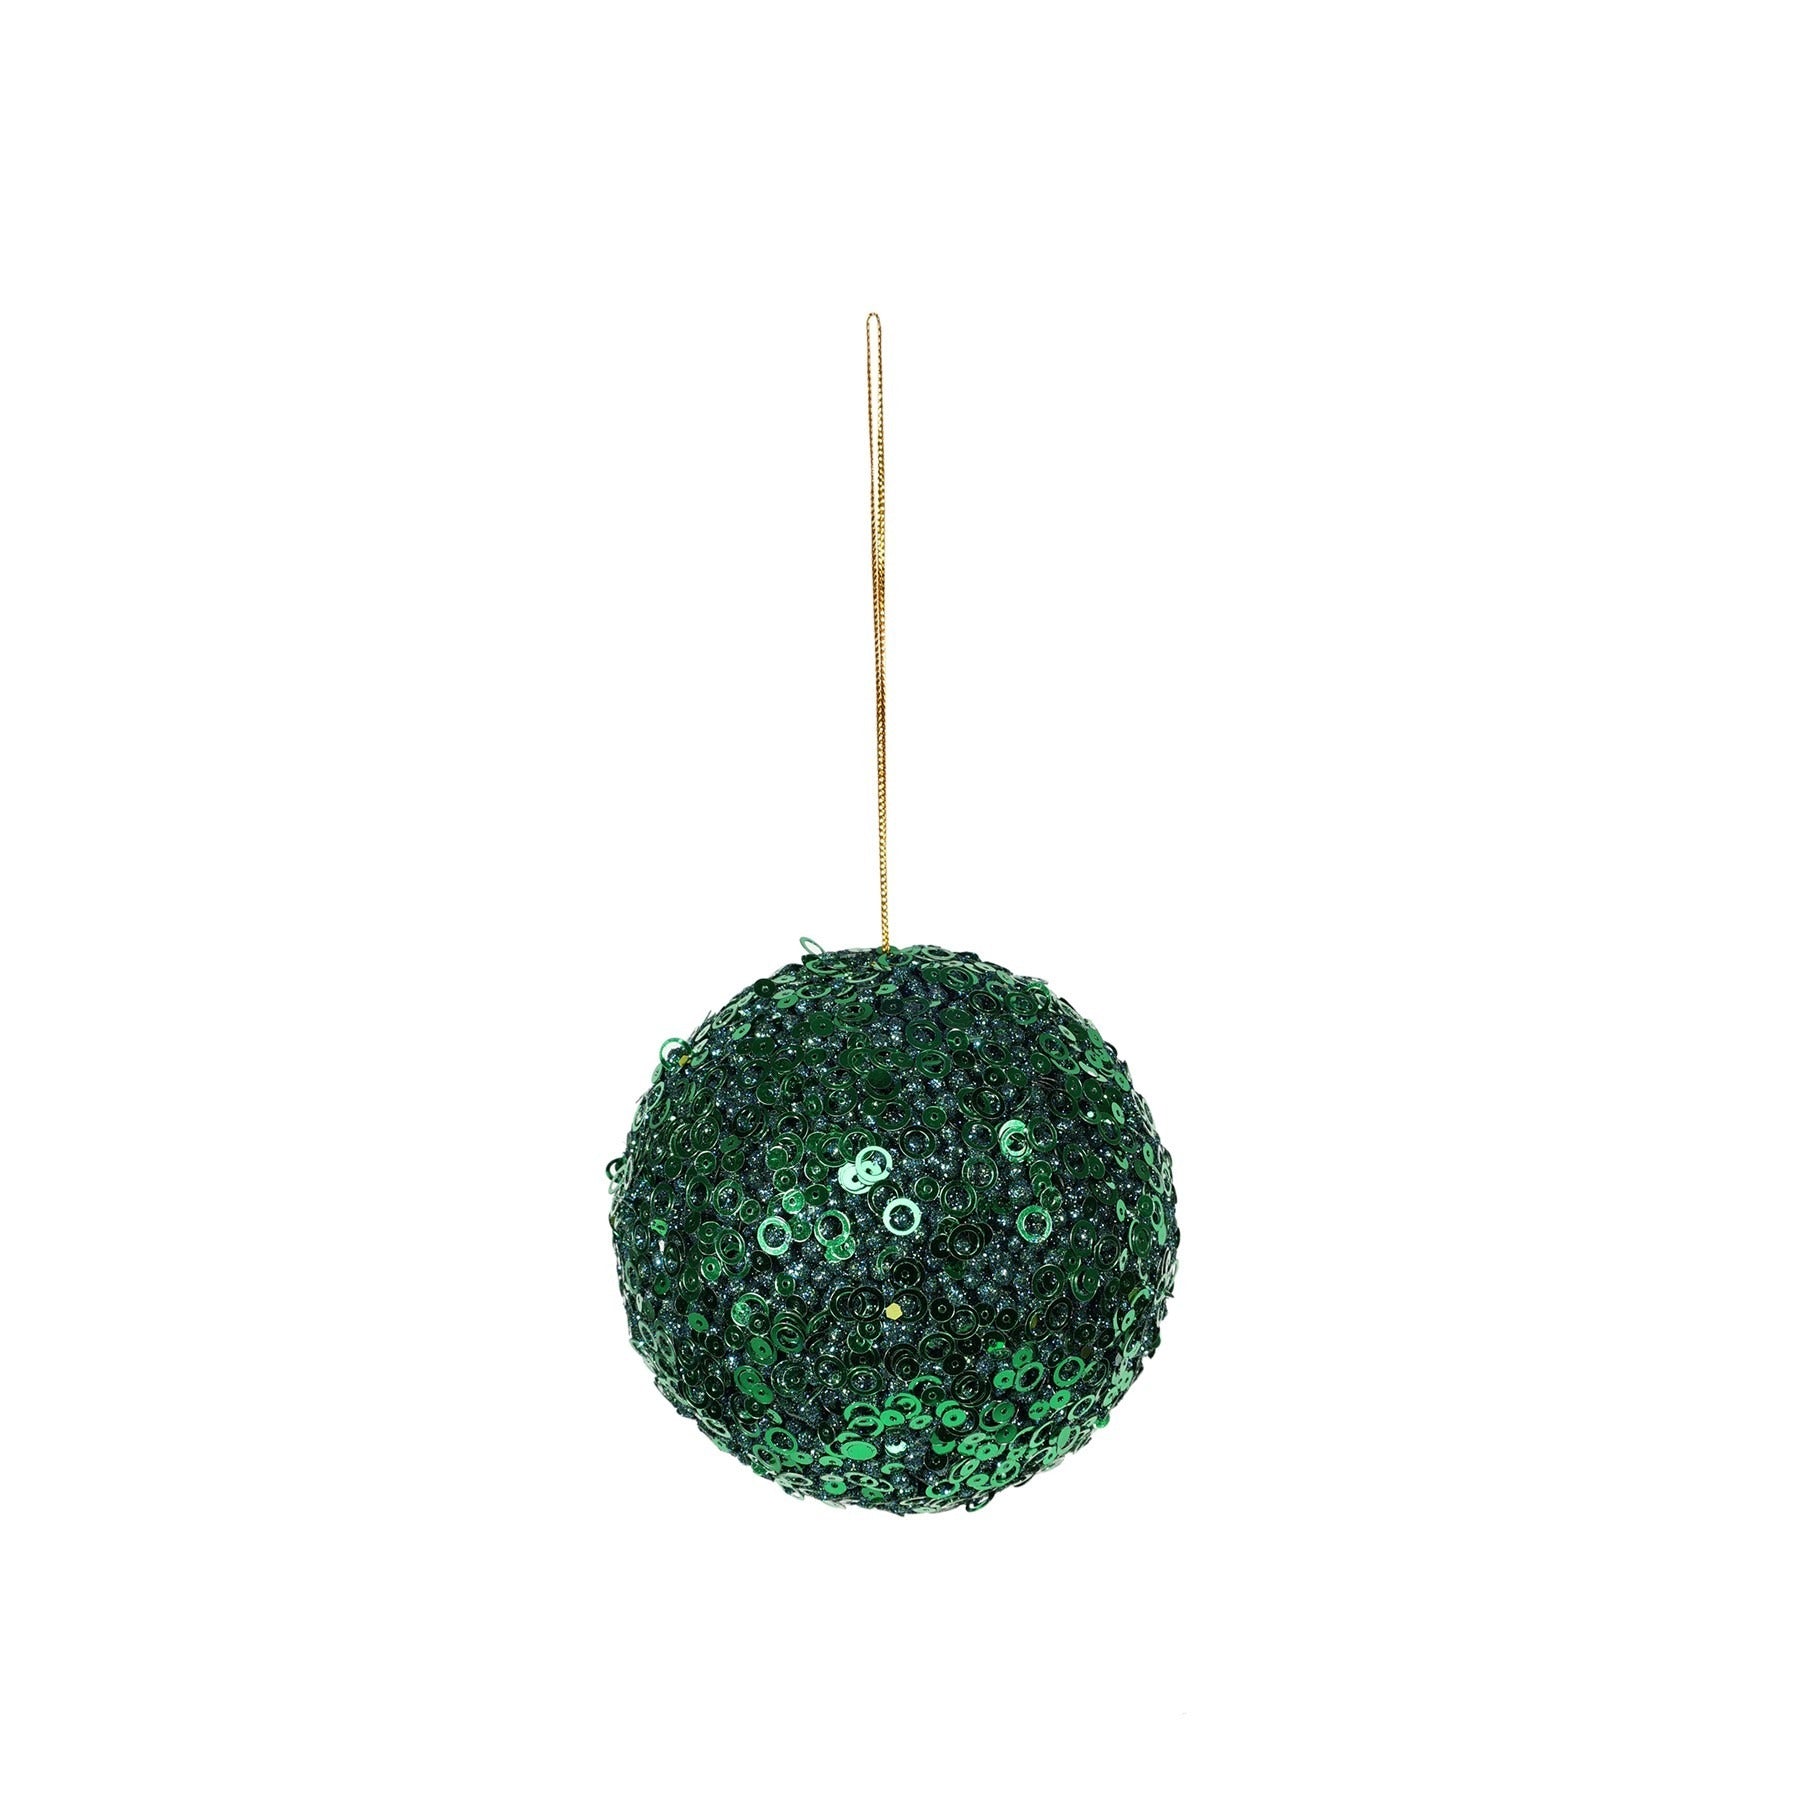 View Green Glitter Bauble Dia10cm information